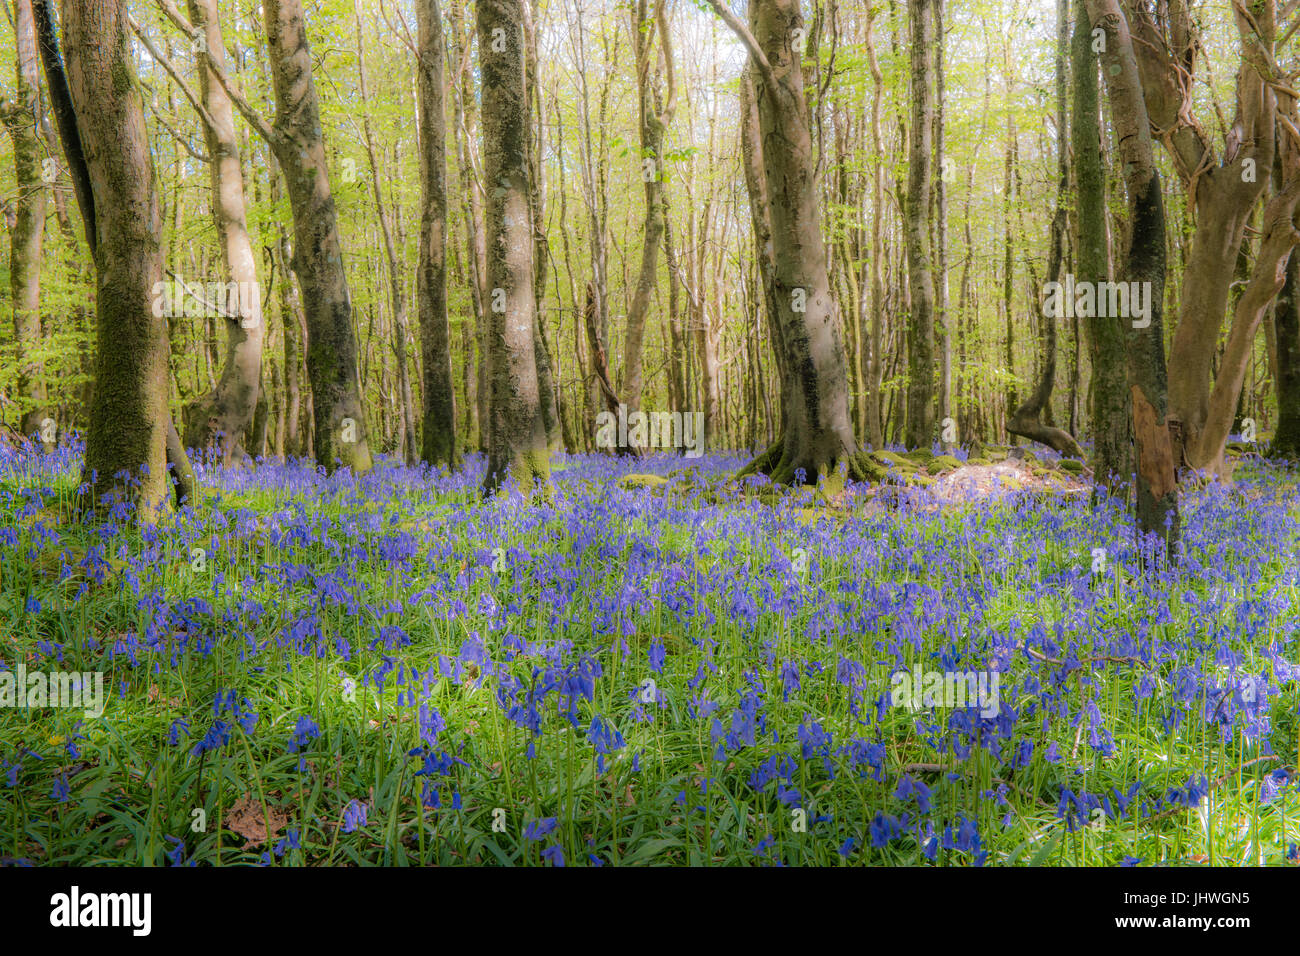 Bluebell blanket in wood in spring Stock Photo